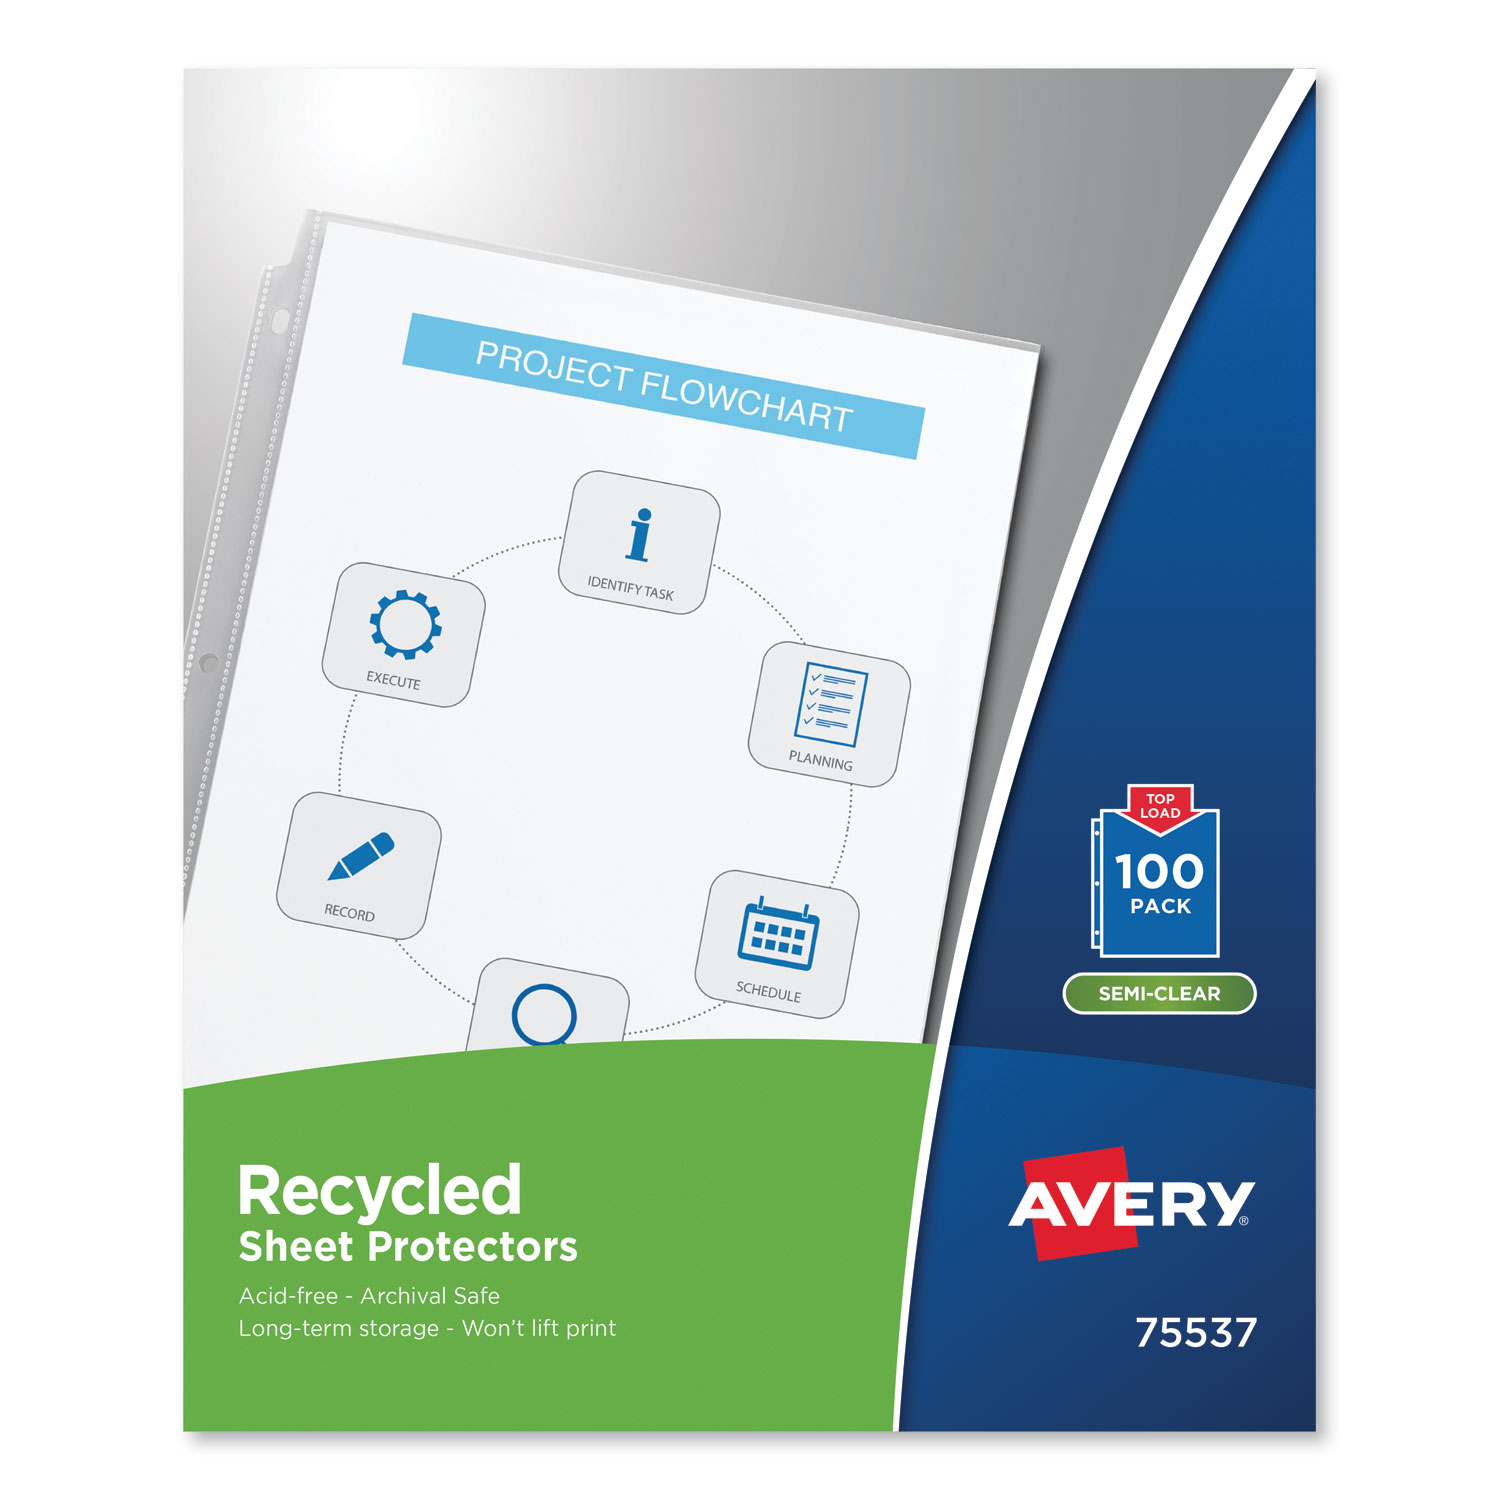  Avery 75537 Top-Load Recycled Polypropylene Sheet Protector, Semi-Clear, 100/Box (AVE75537) 